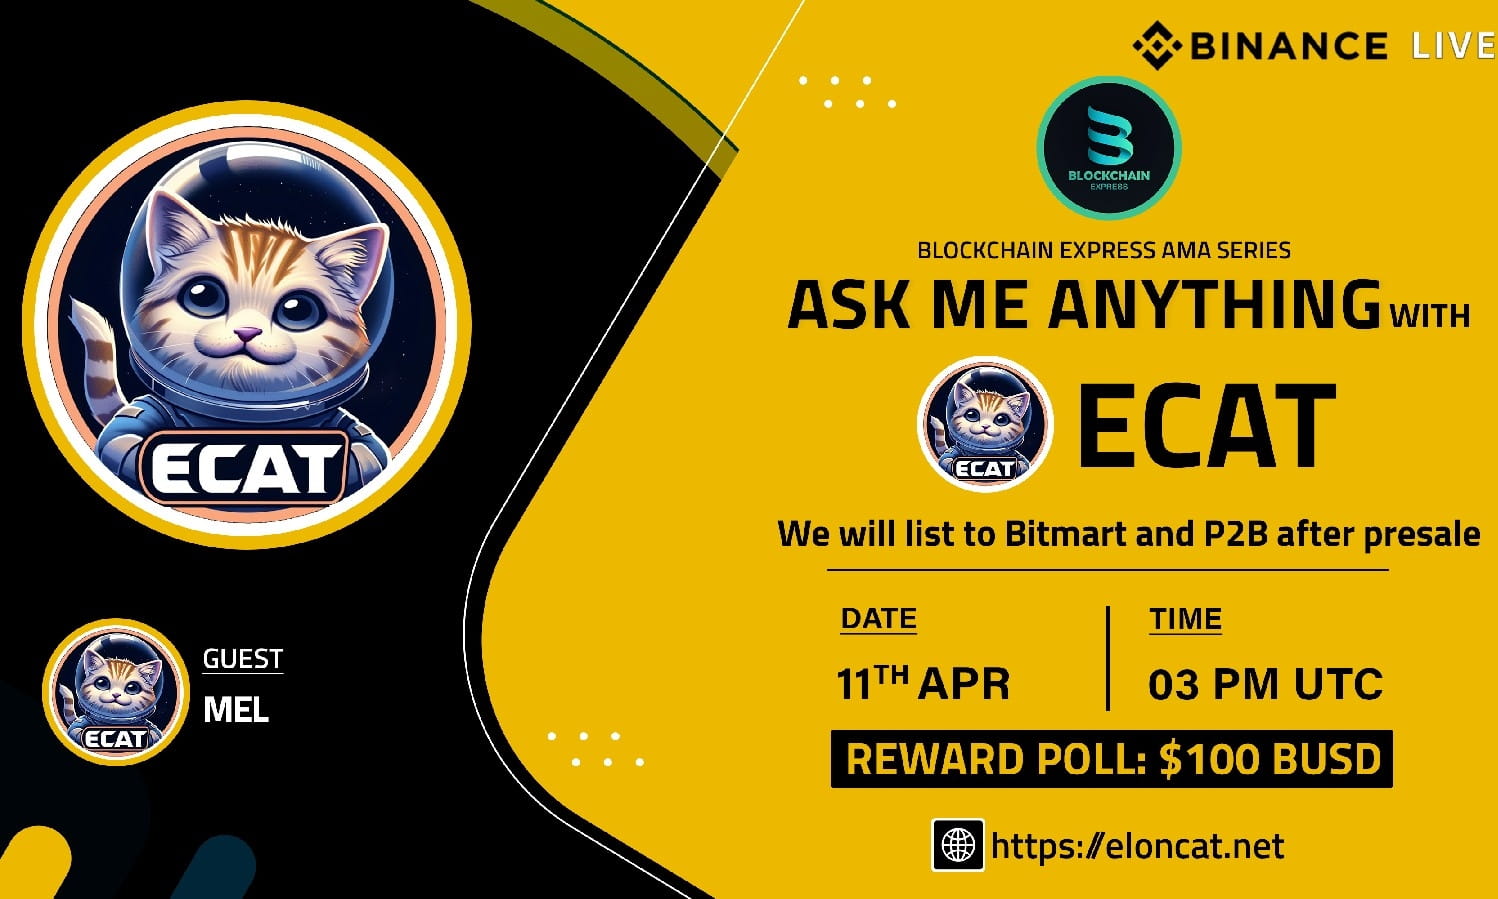 ₿lockchain Express will be hosting an AMA session with" ECAT "